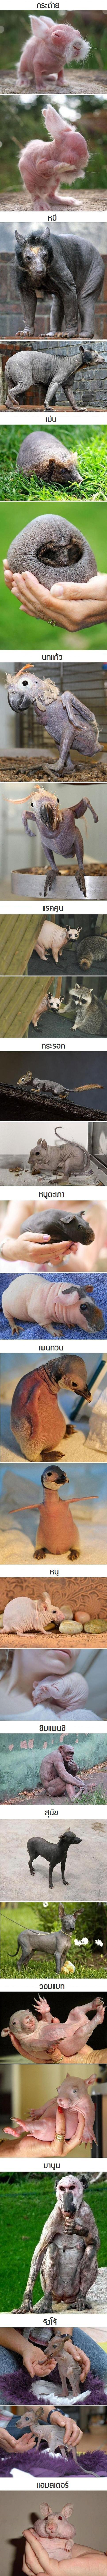 animals-without-hair-0